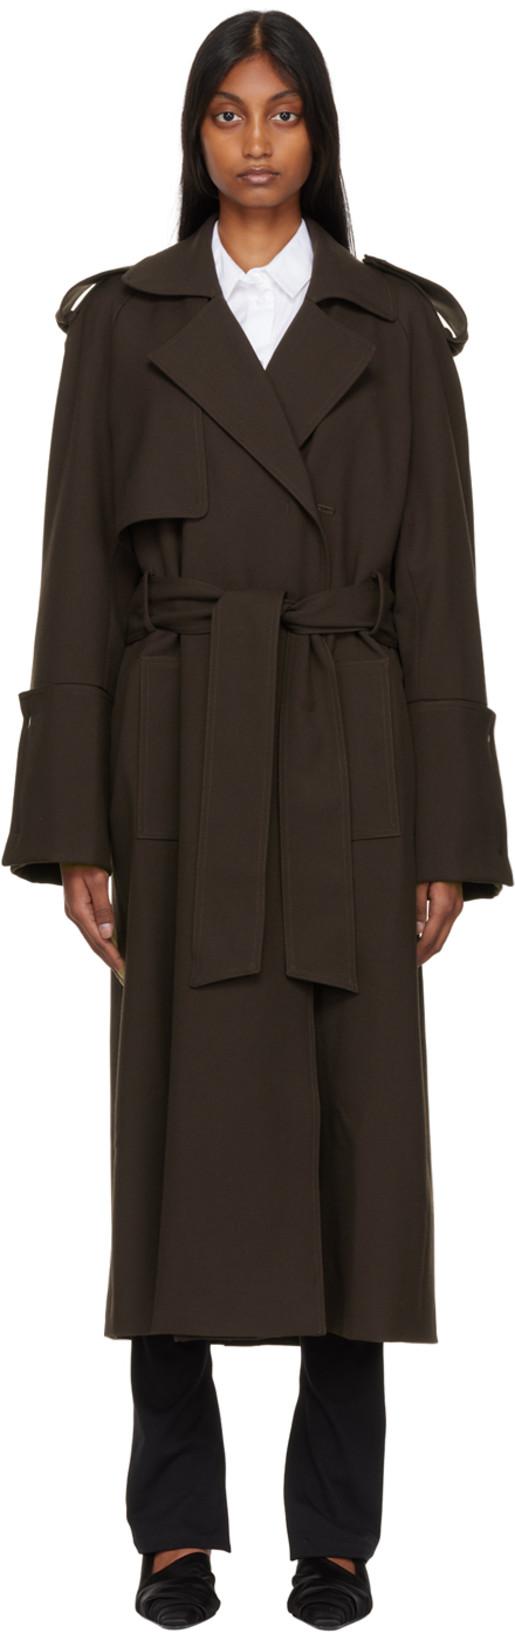 Brown Wool Trench Coat by BITE